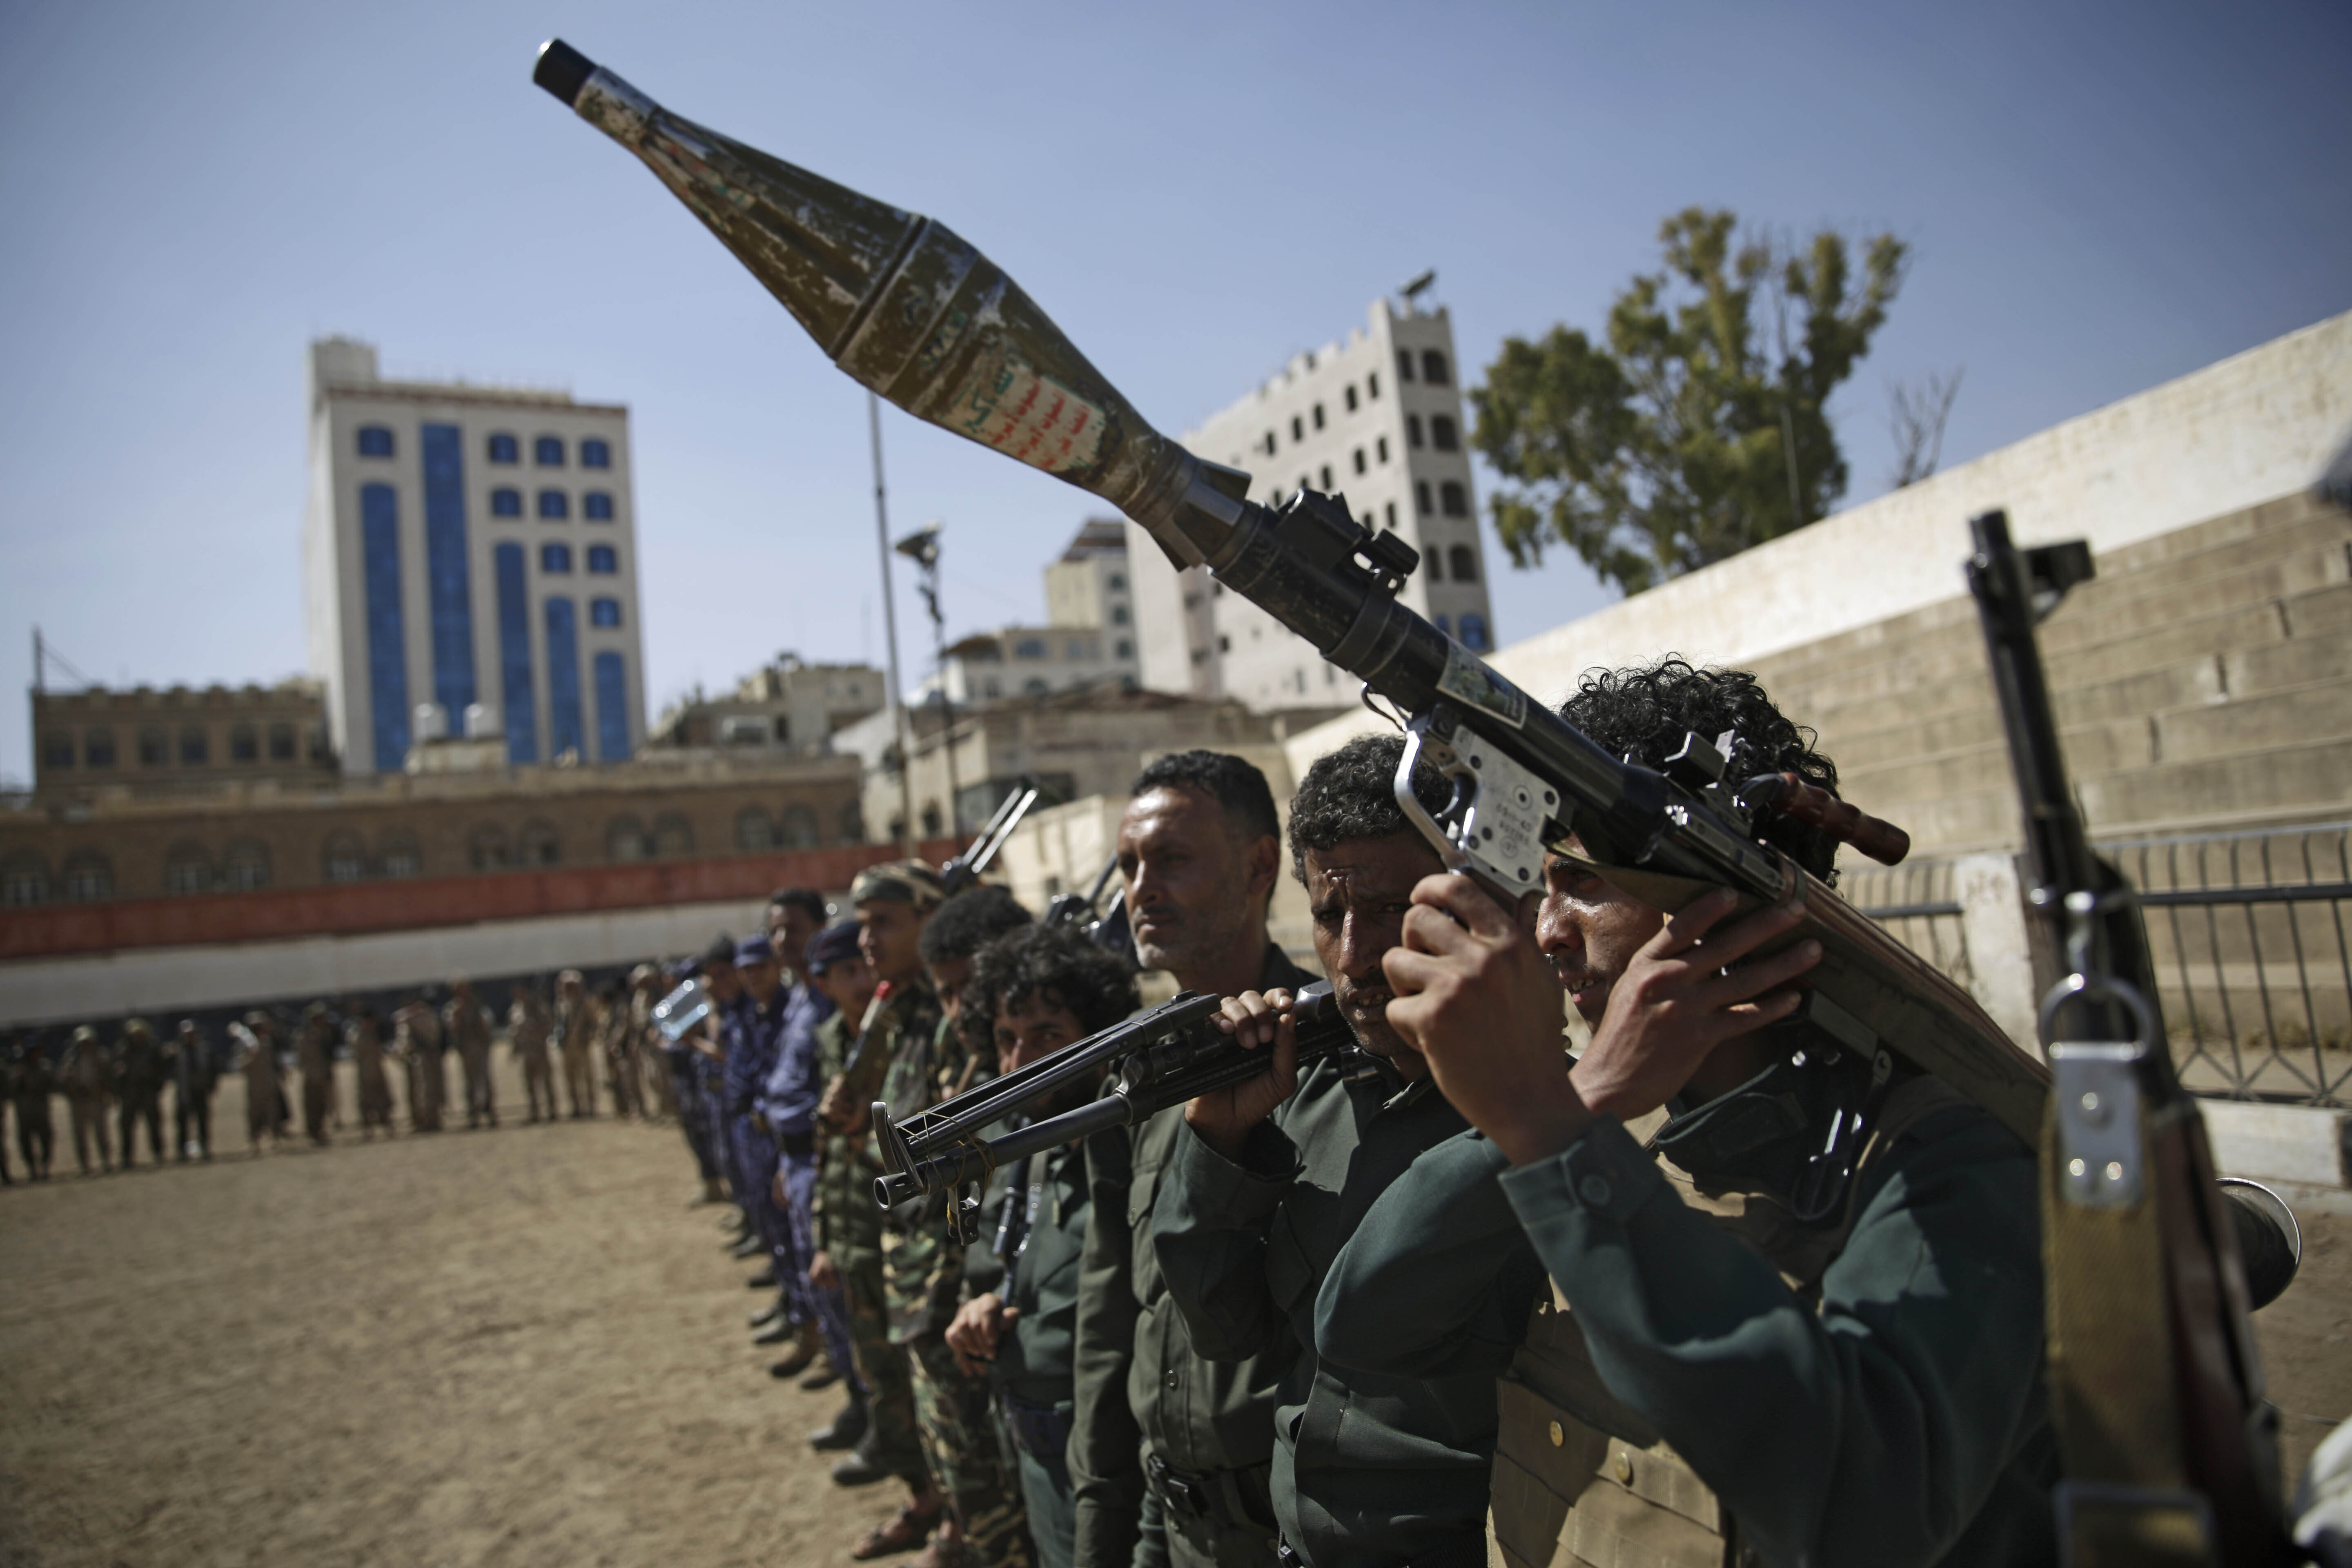 Houthi rebel fighters display their weapons during a gathering aimed at mobilizing more fighters for the Iranian-backed Houthi movement, in Sanaa, Yemen, Thursday, Feb. 20, 2020. The Houthi rebels control the capital, Sanaa, and much of the country’s north, where most of the population lives. They are at war with a U.S.-backed, Saudi-led coalition fighting on behalf of the internationally recognized government. (AP Photo/Hani Mohammed)